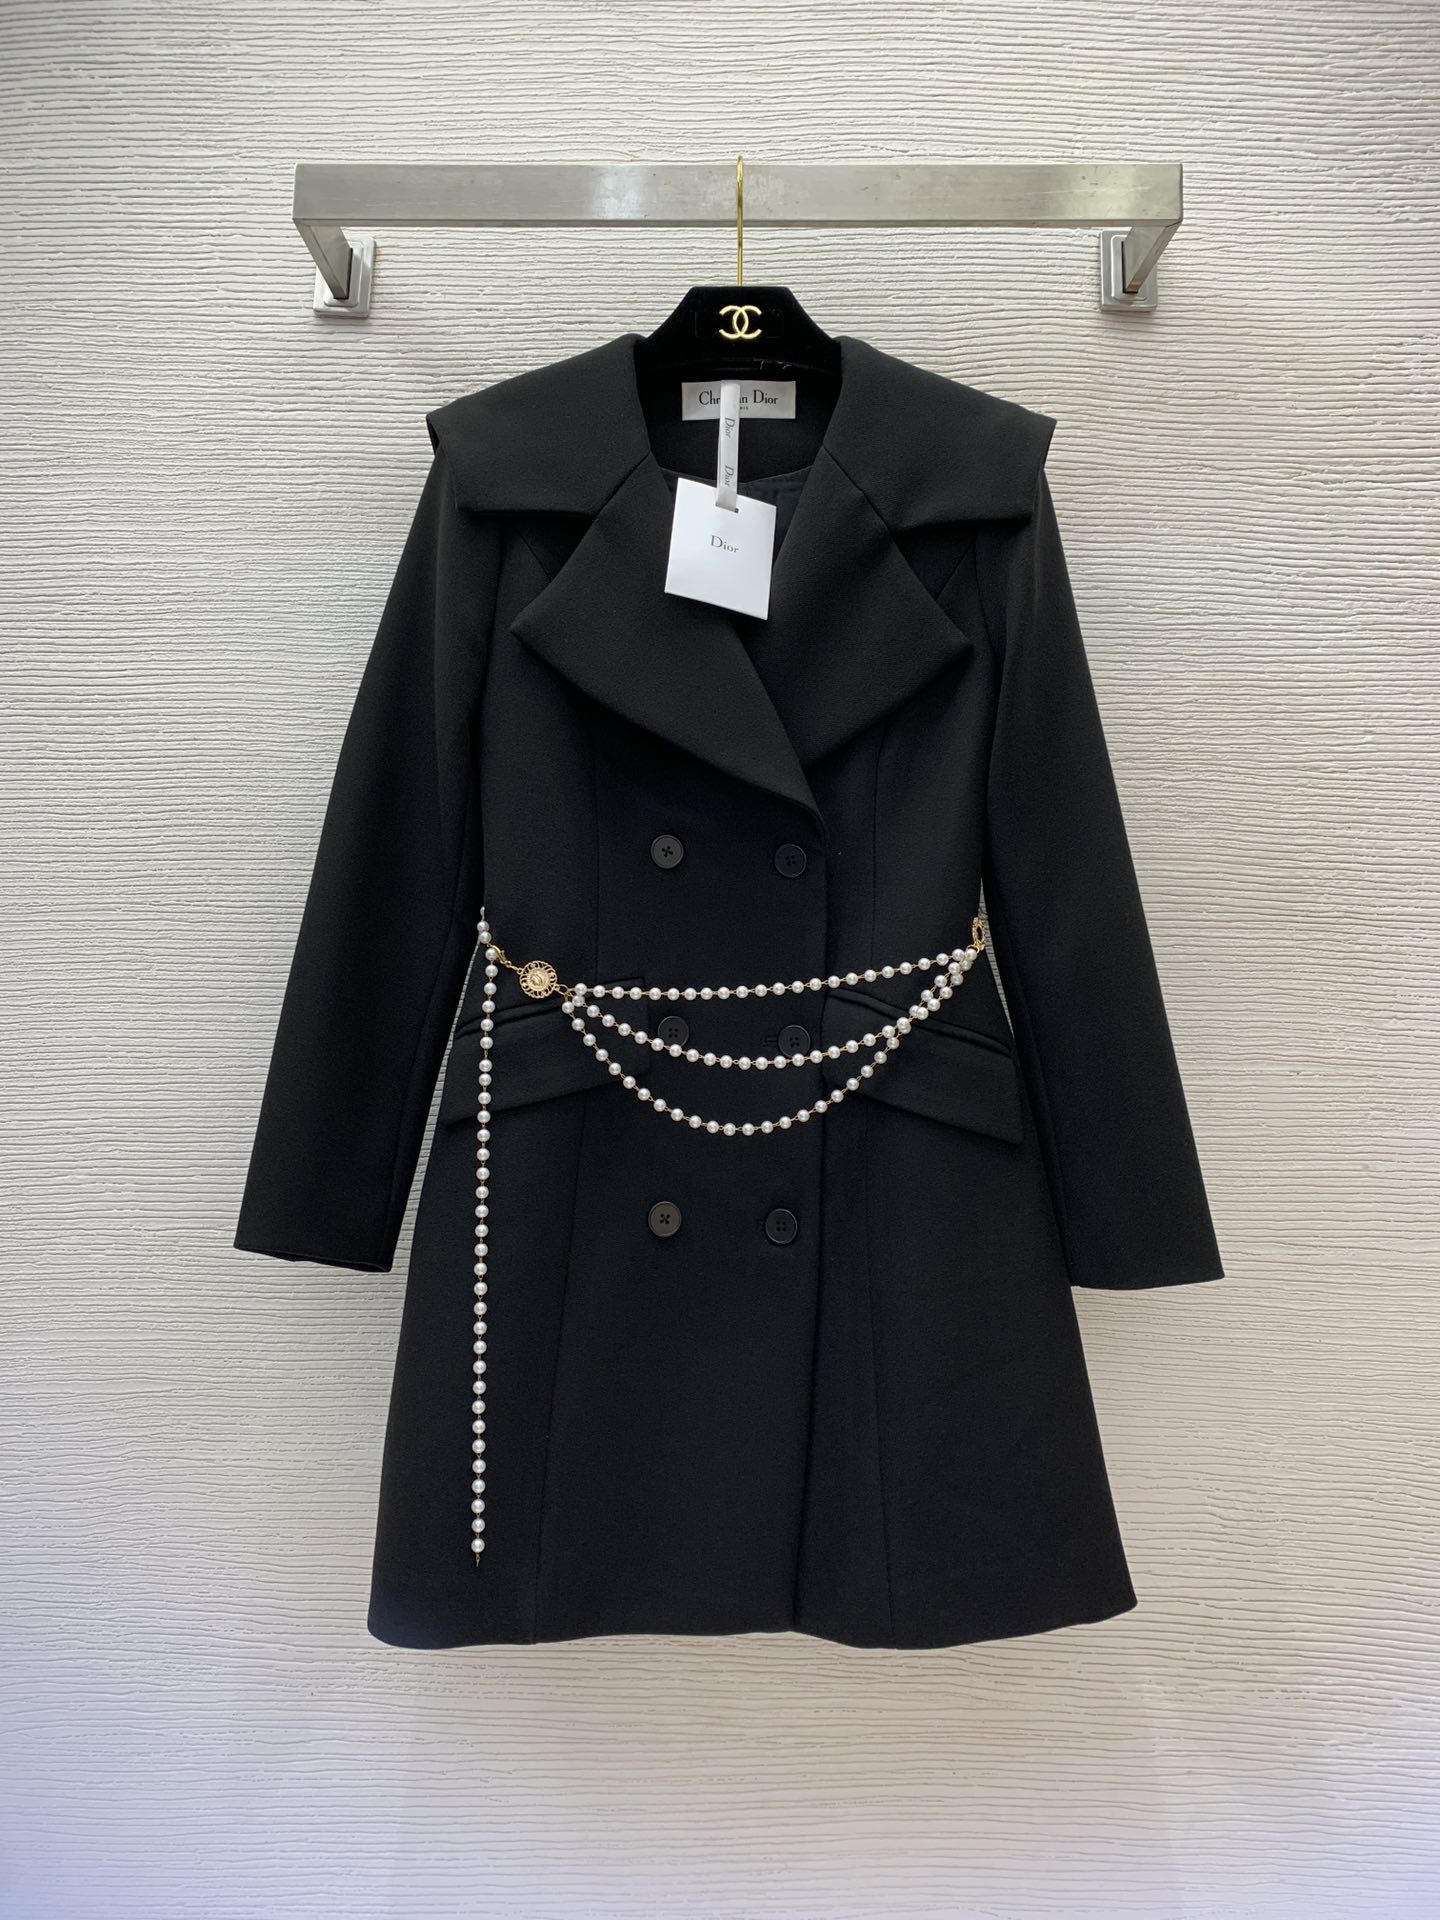 Dior Clothing Coats & Jackets Replica Best
 Black Red Fall/Winter Collection Fashion